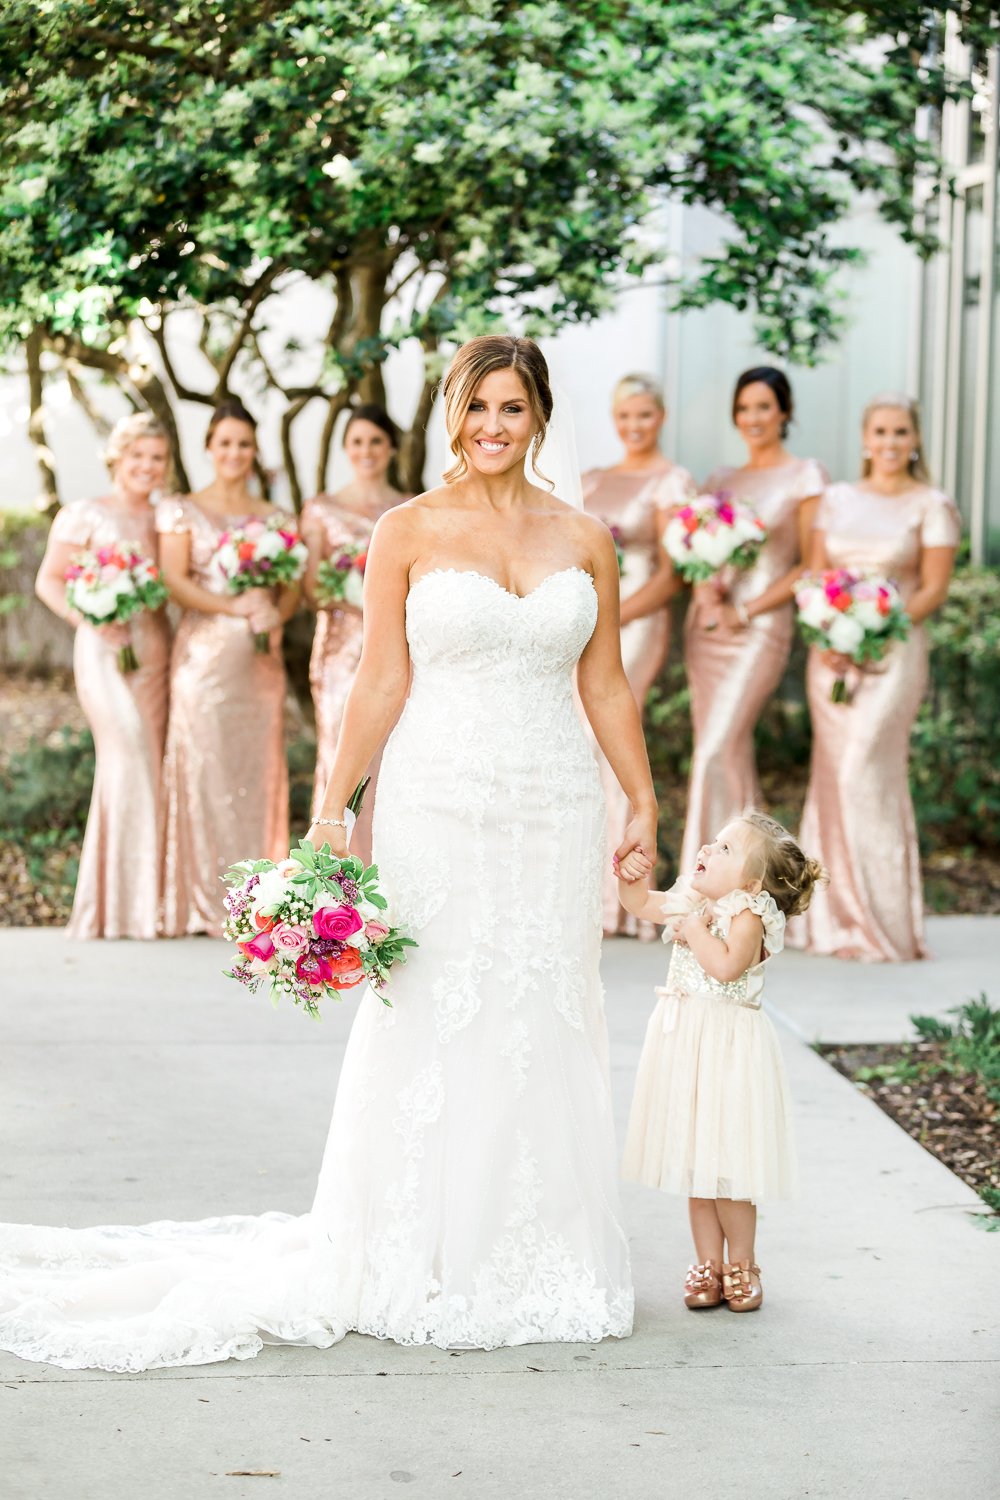 Bride with her bridal party in Florida Yacht club wedding in Jacksonville, FL